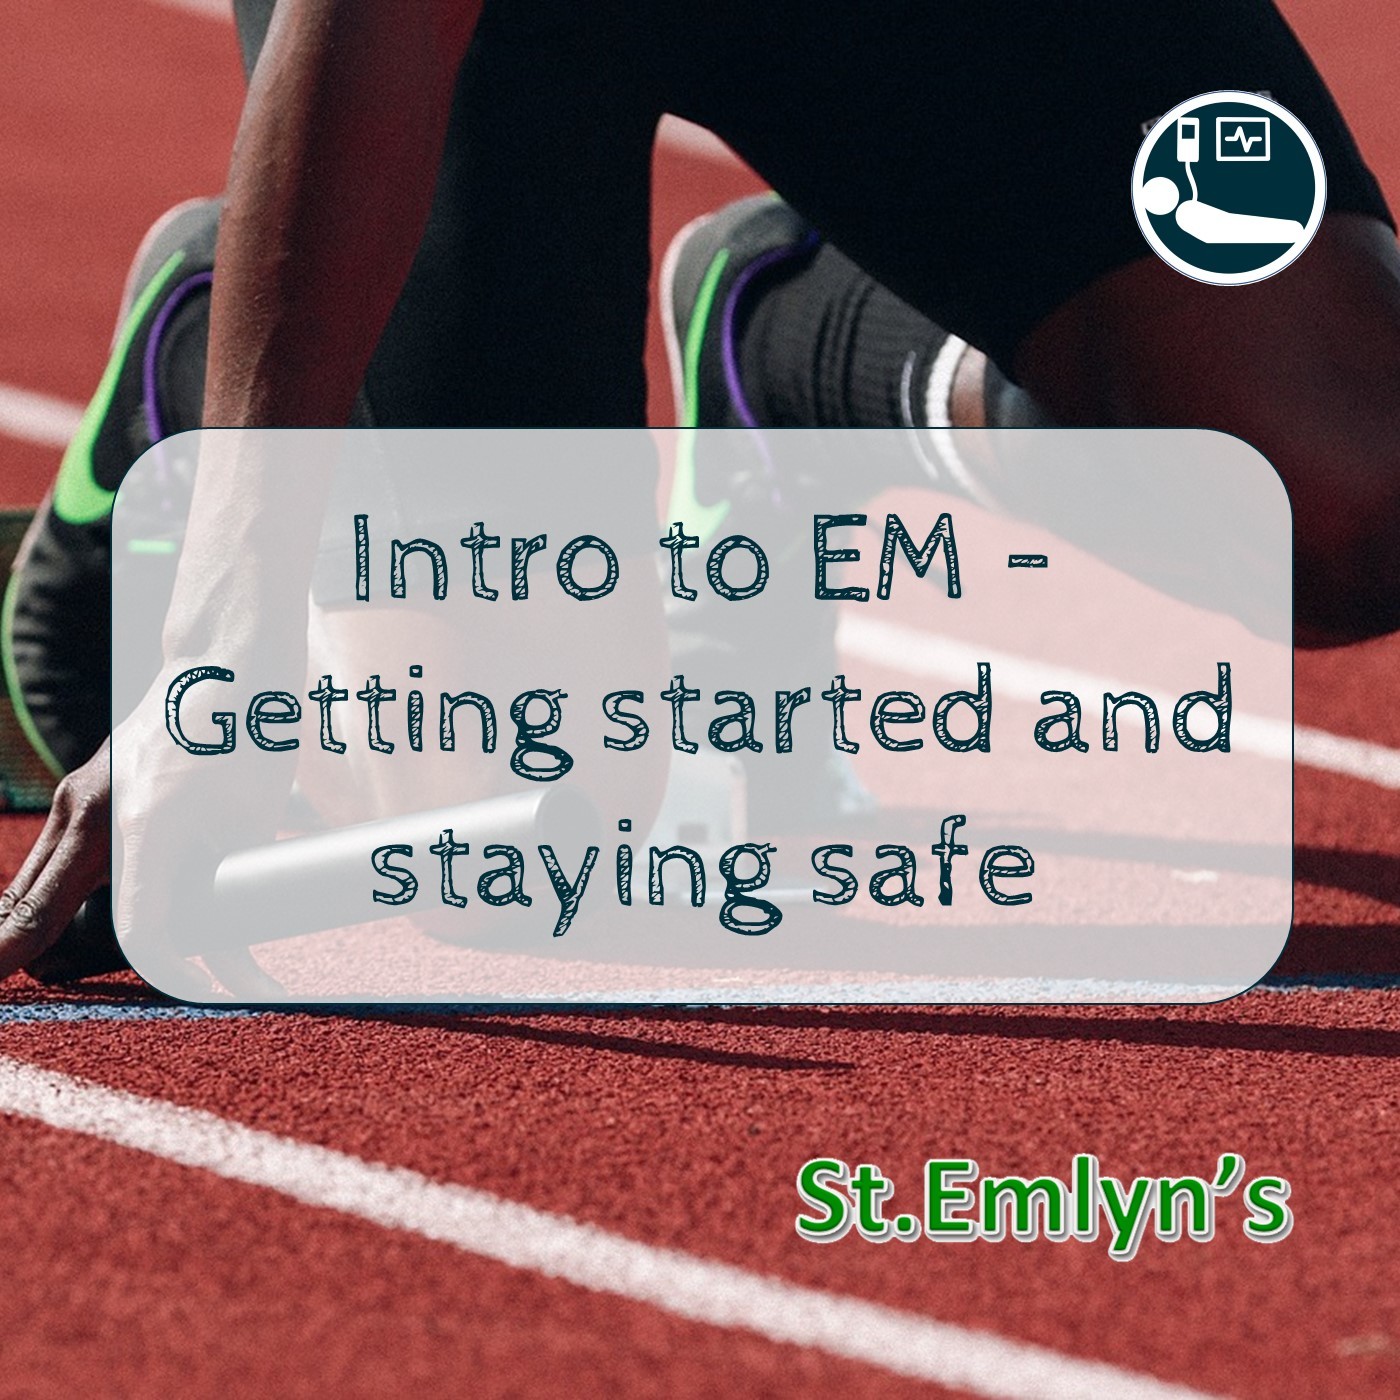 Ep 10 - Intro to EM: Staying safe in your first job